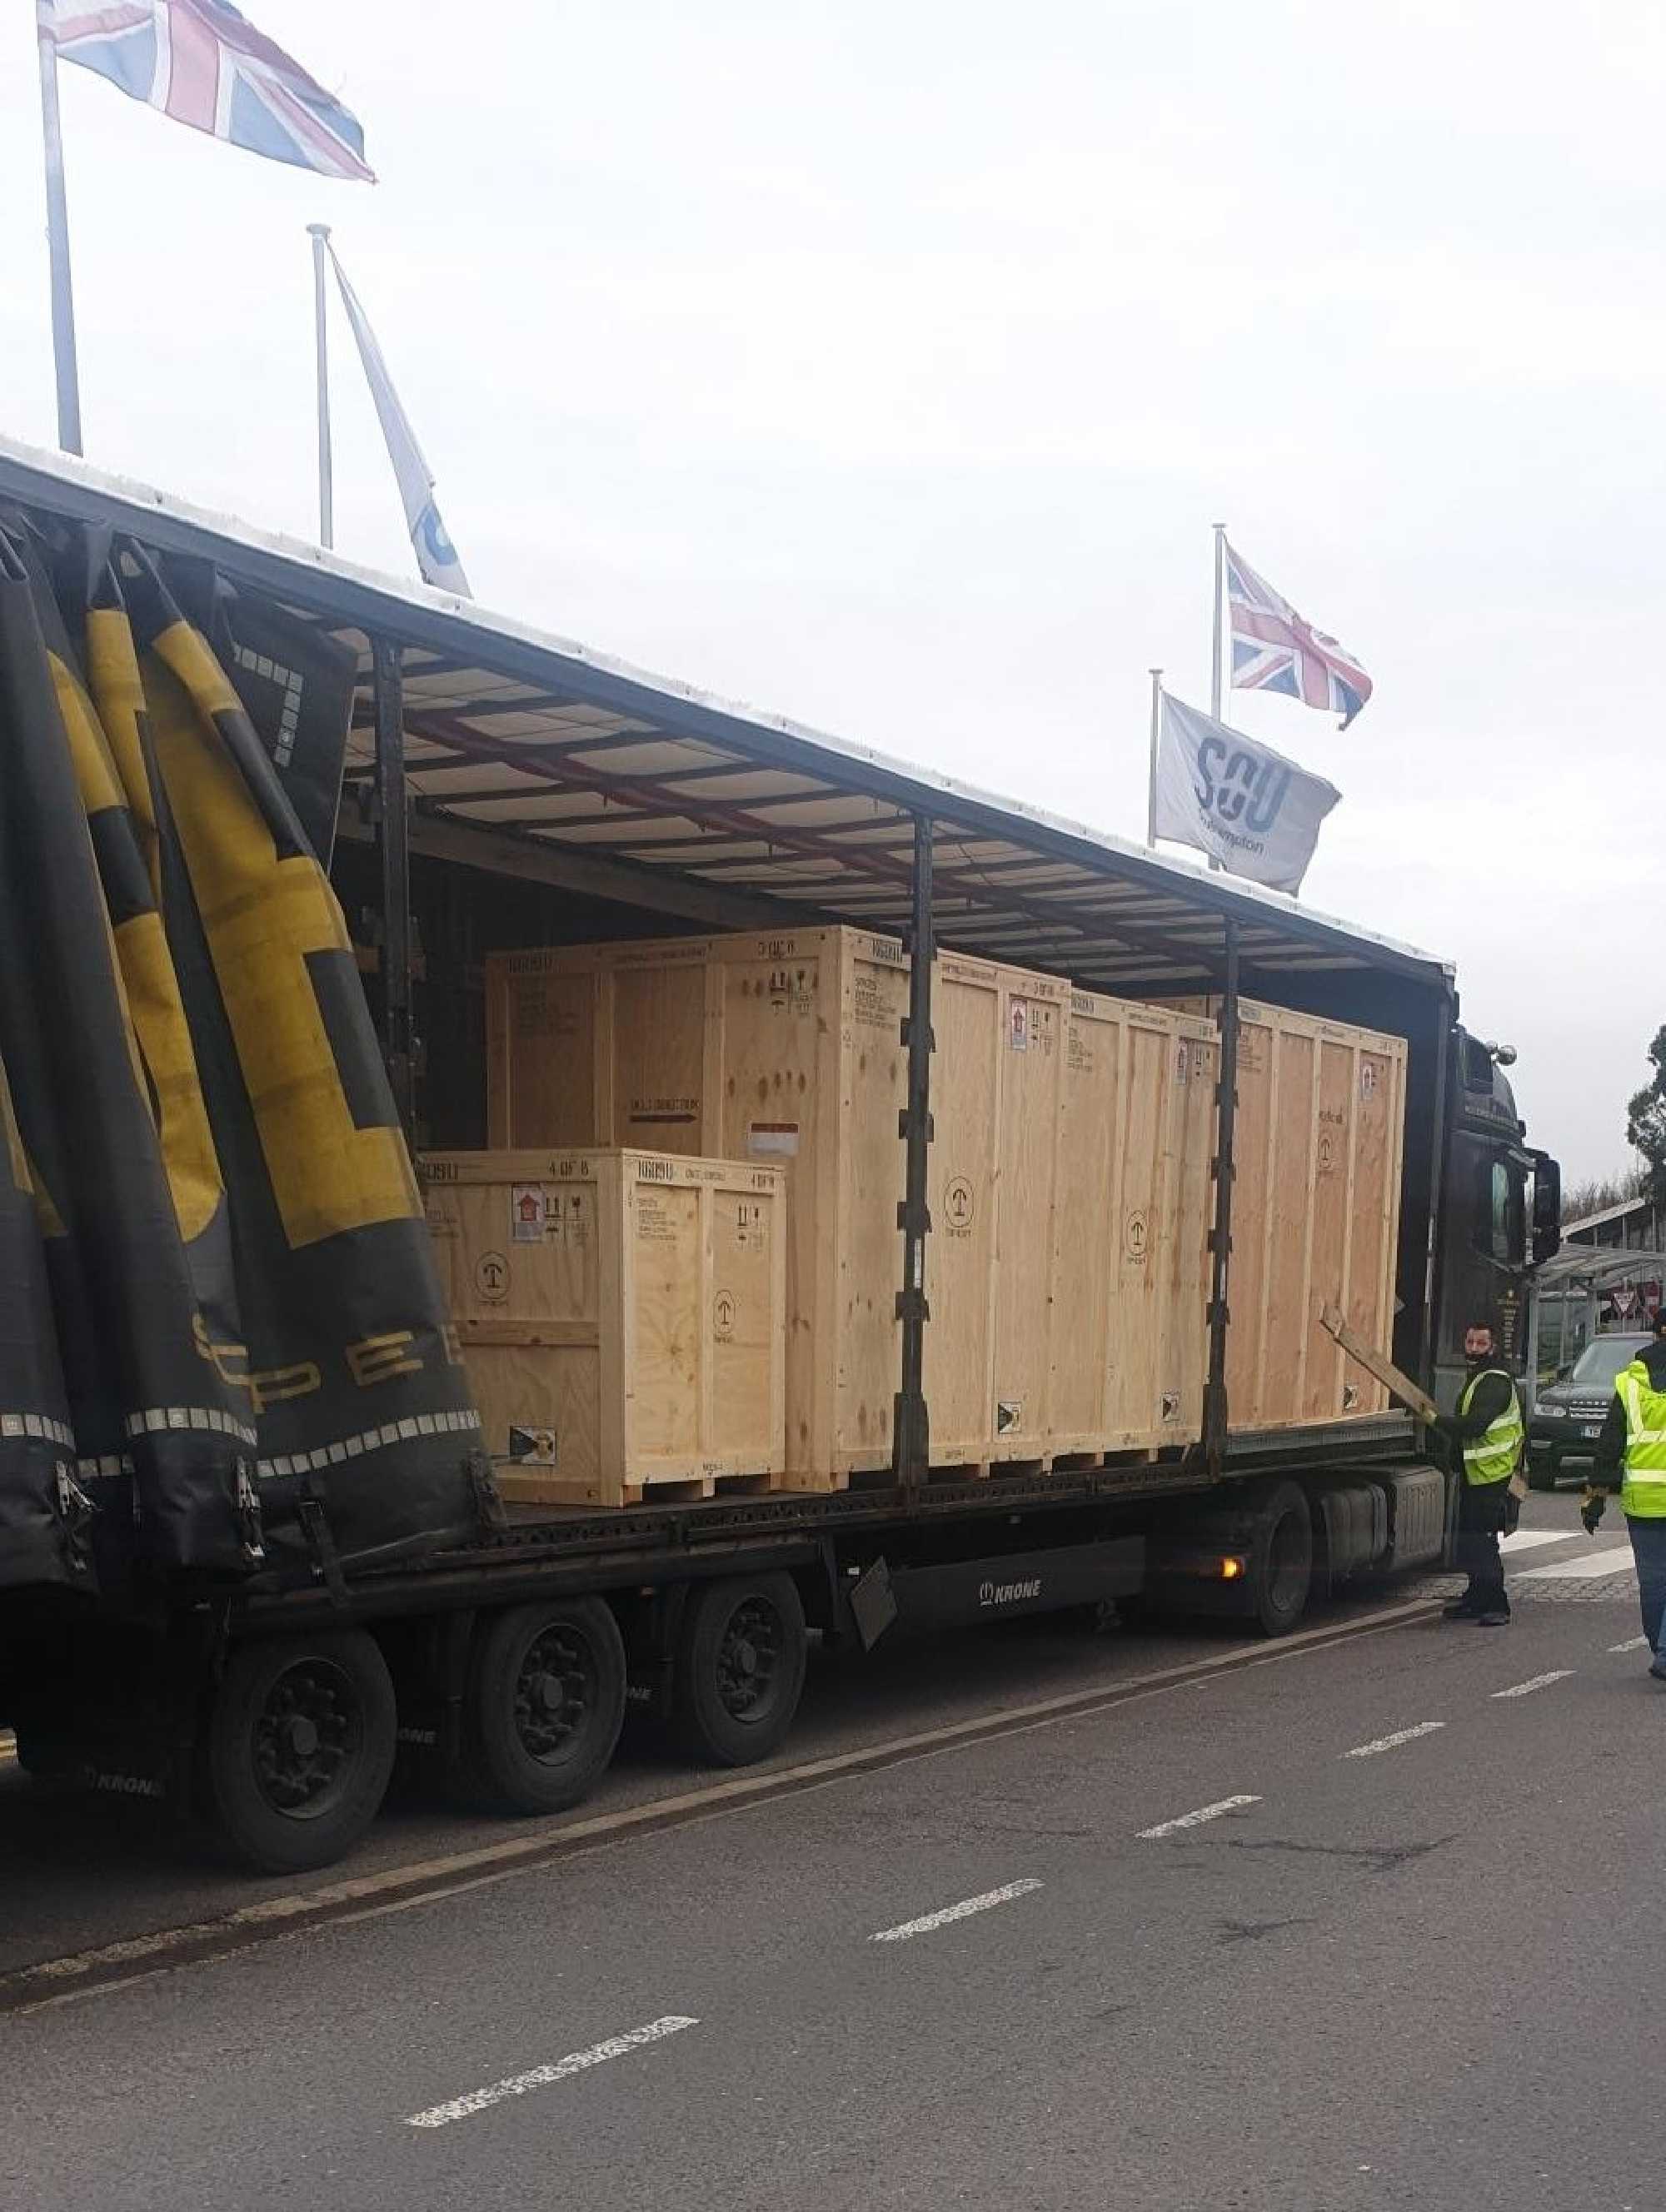 Lorry delivering x-ray equipment